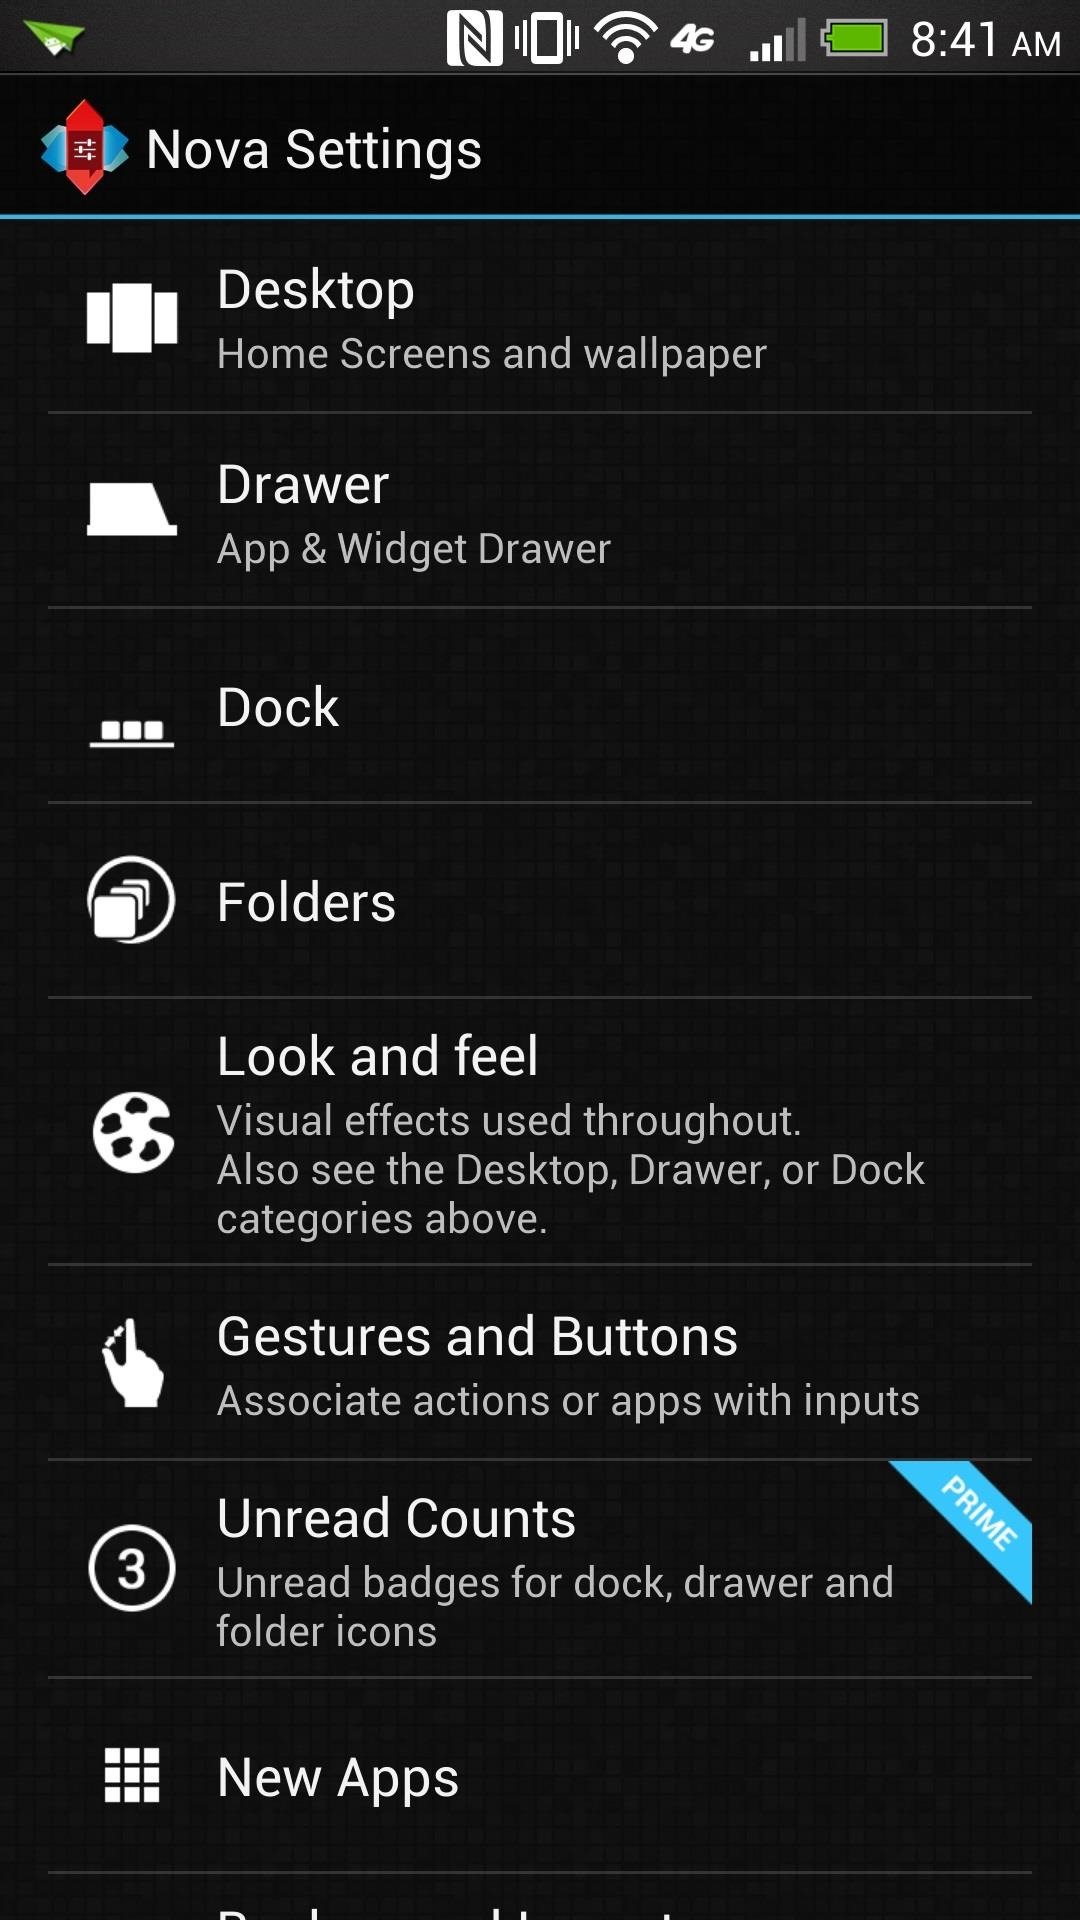 How to De-Bloat Your HTC One to Get a Familiar Stock Android UI—Without Rooting